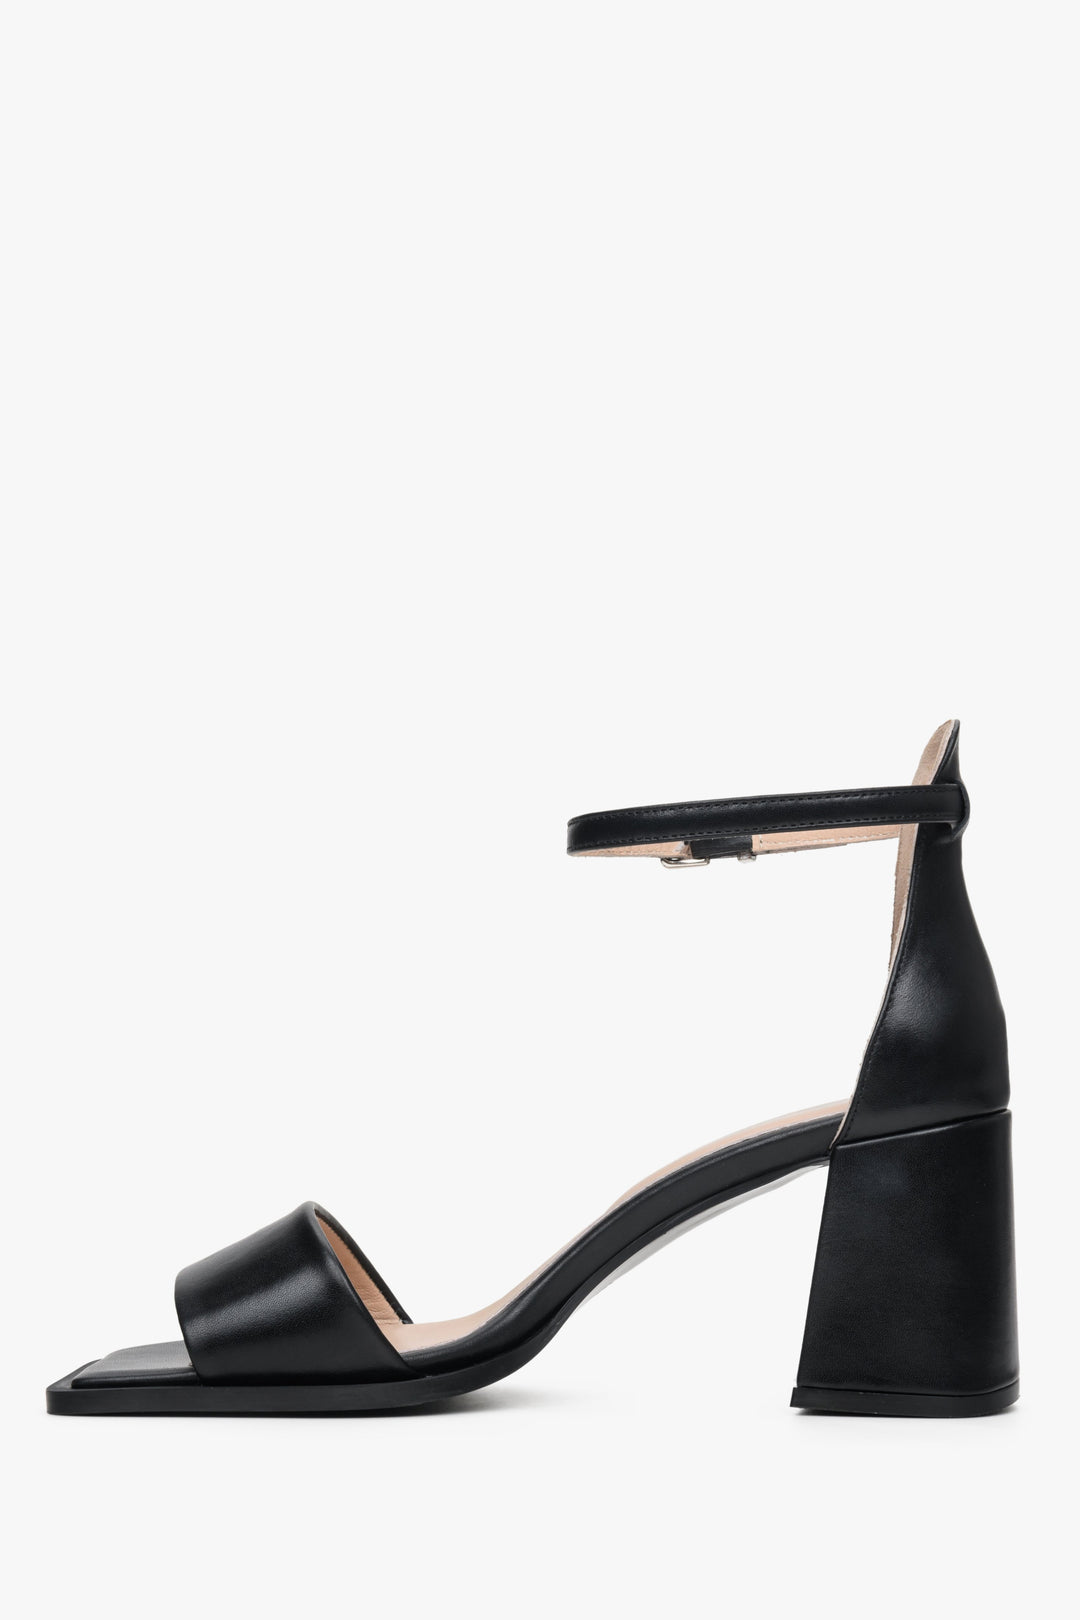 Women's black block-heeled sandals made of natural leather by Estro - shoe profile.